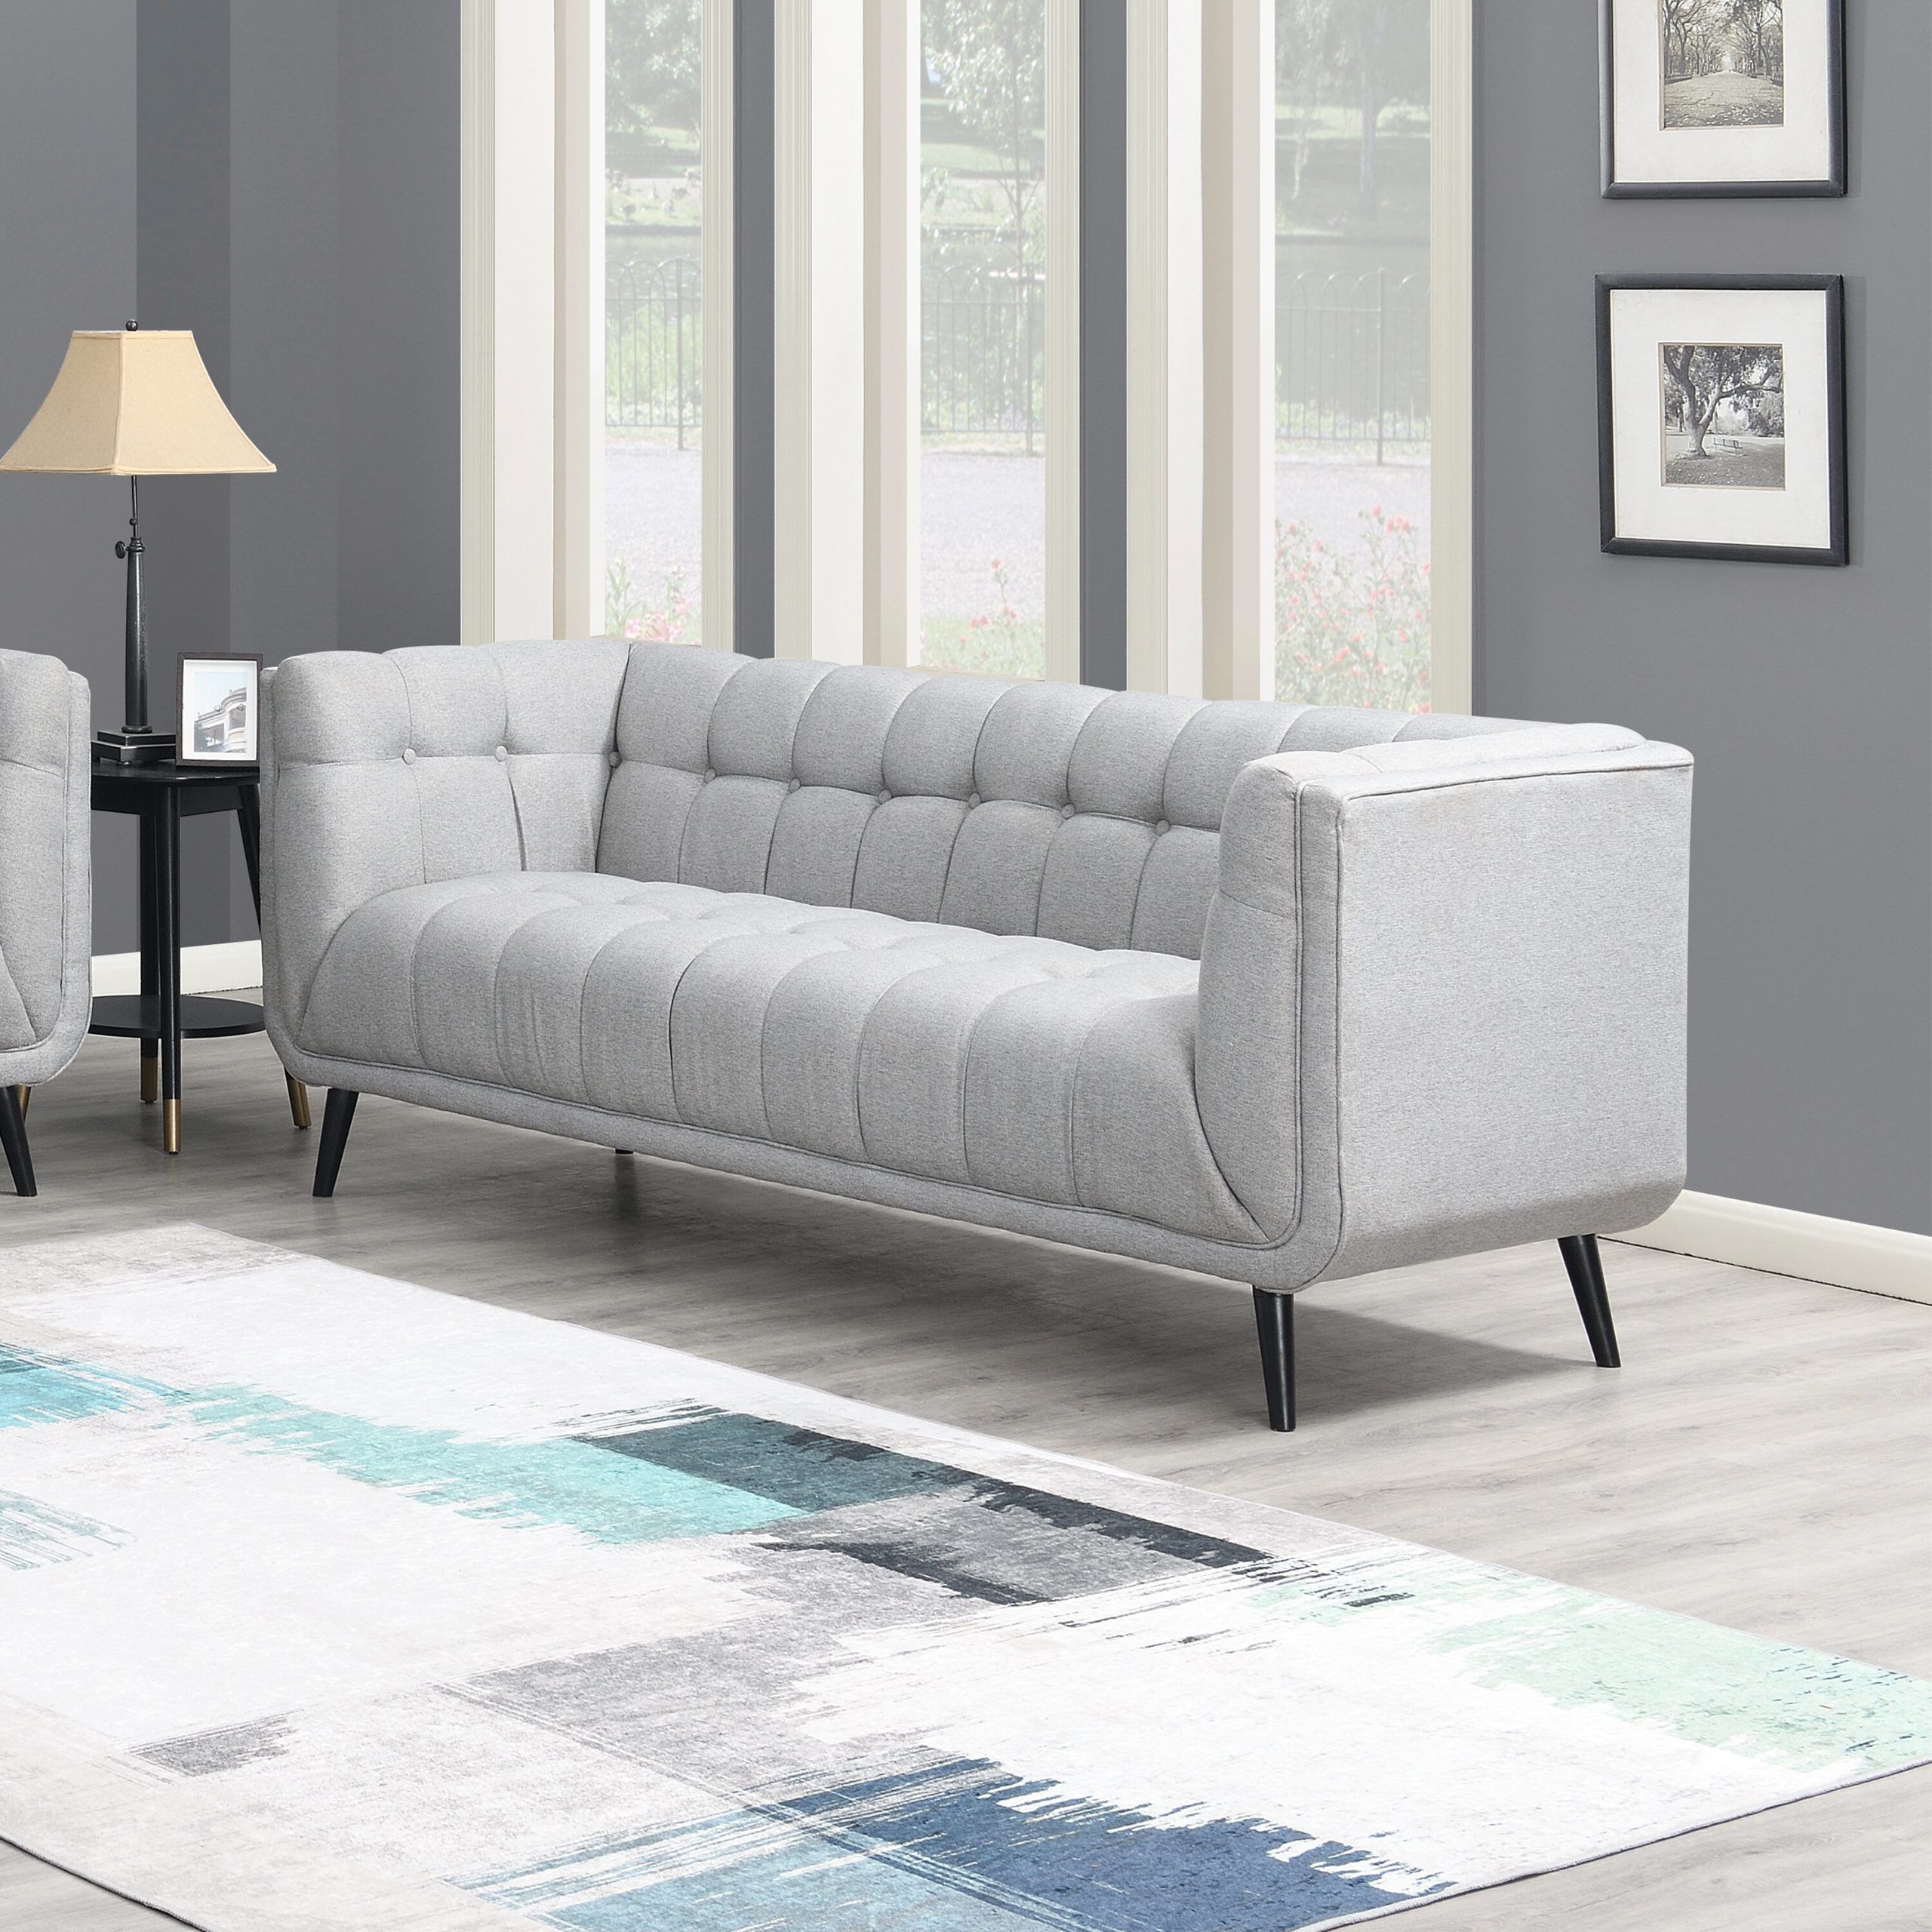 Corrigan Studio® Modern Mid Century Button Tufted Upholstered Sofa, Gray |  Wayfair With Tufted Upholstered Sofas (View 4 of 15)